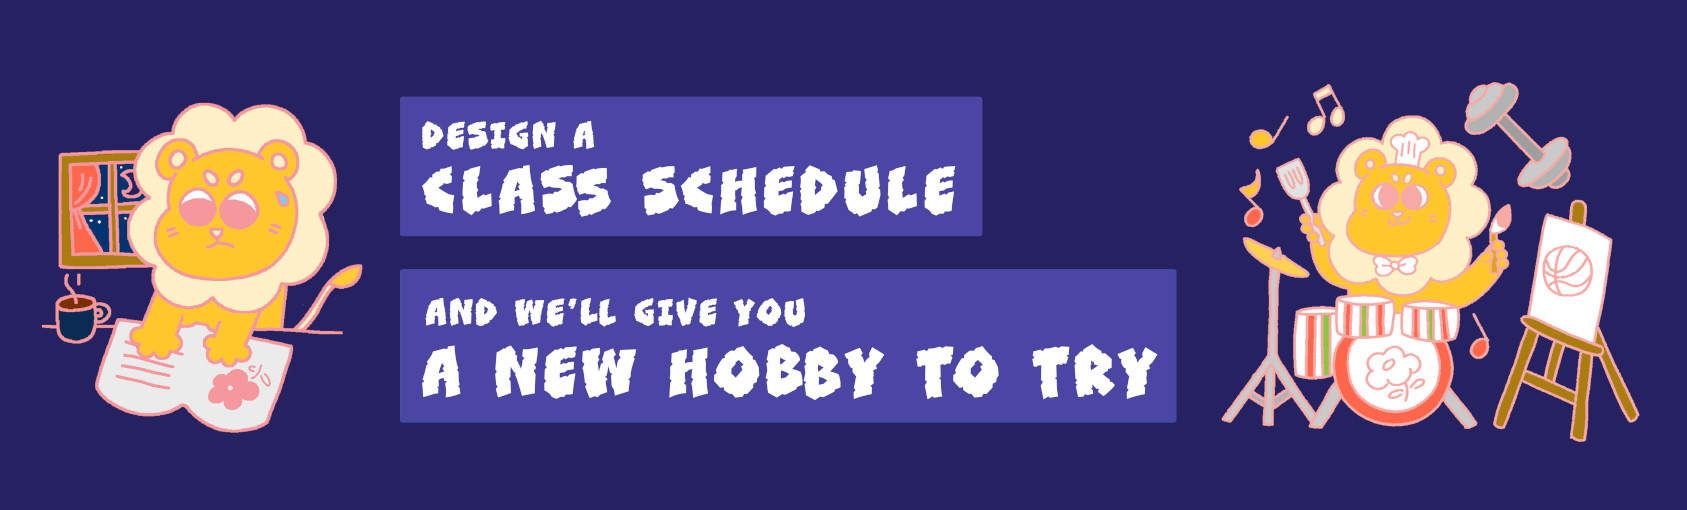 Quiz: Design a Class Schedule and We’ll Give You a New Hobby to Try banner